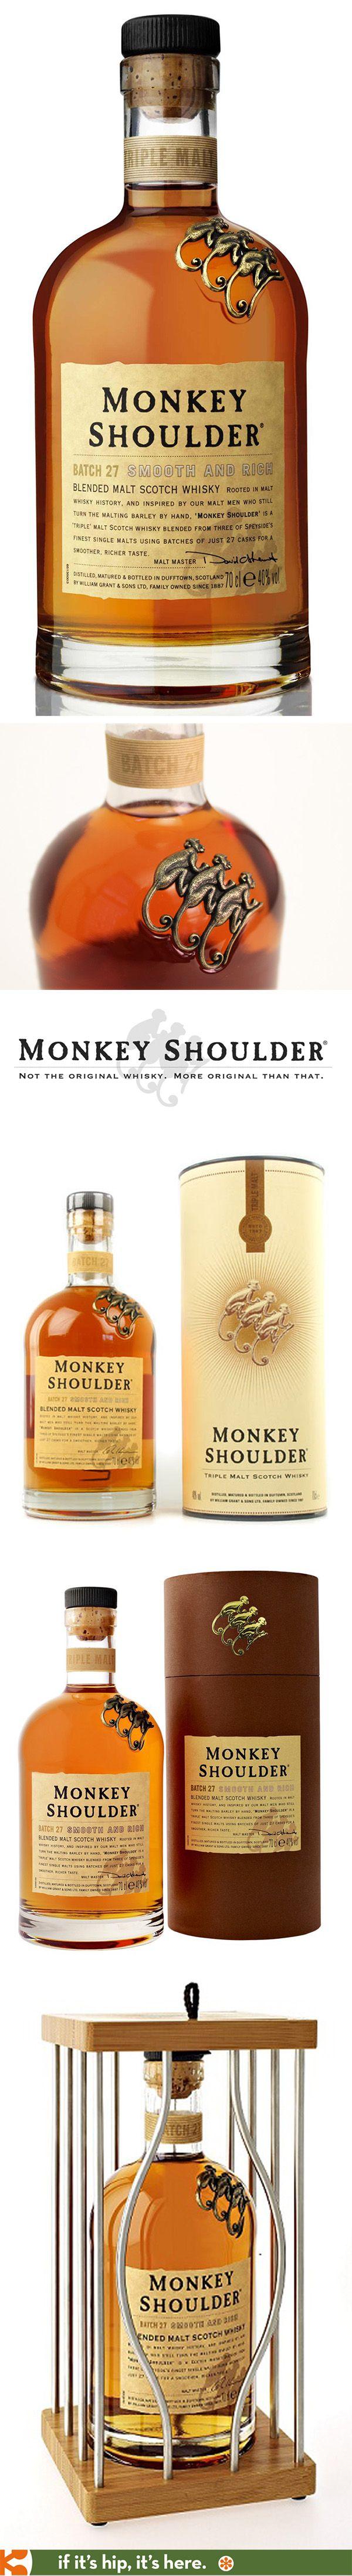 Monkey Shoulder Whiskey Logo - Monkey Shoulder Whisky and its various packaging. | Packaging Pick ...